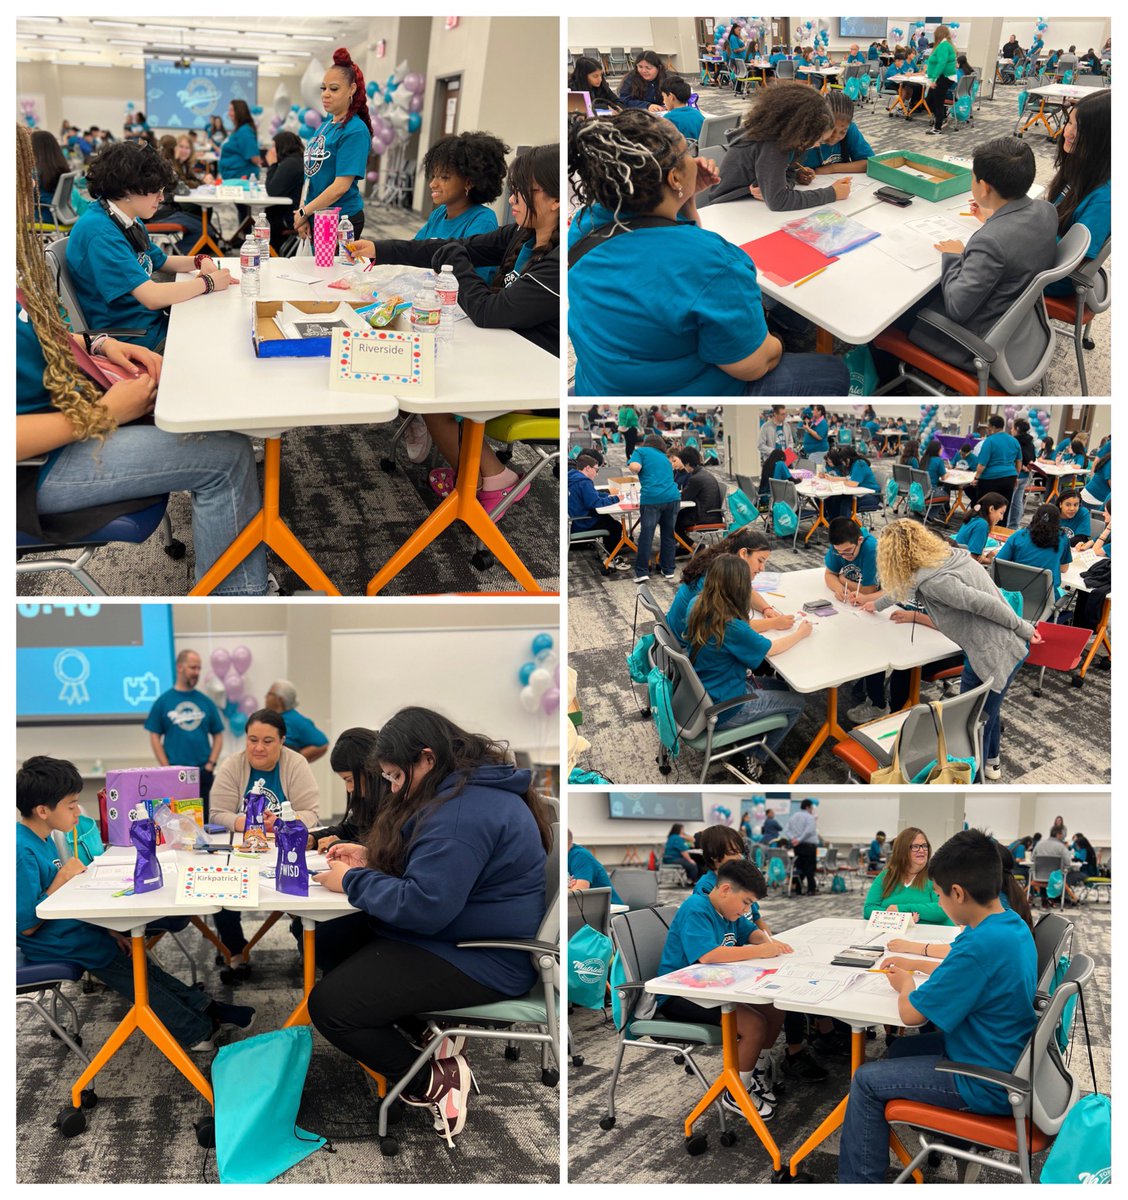 What an incredible display of talent at our 13th Annual Middle School Problem Solving Math Competition! So proud of all our students and the hard work they put in. Kudos to our dedicated teachers for their relentless support and CONGRATULATIONS to all of the winners!! MathStars!